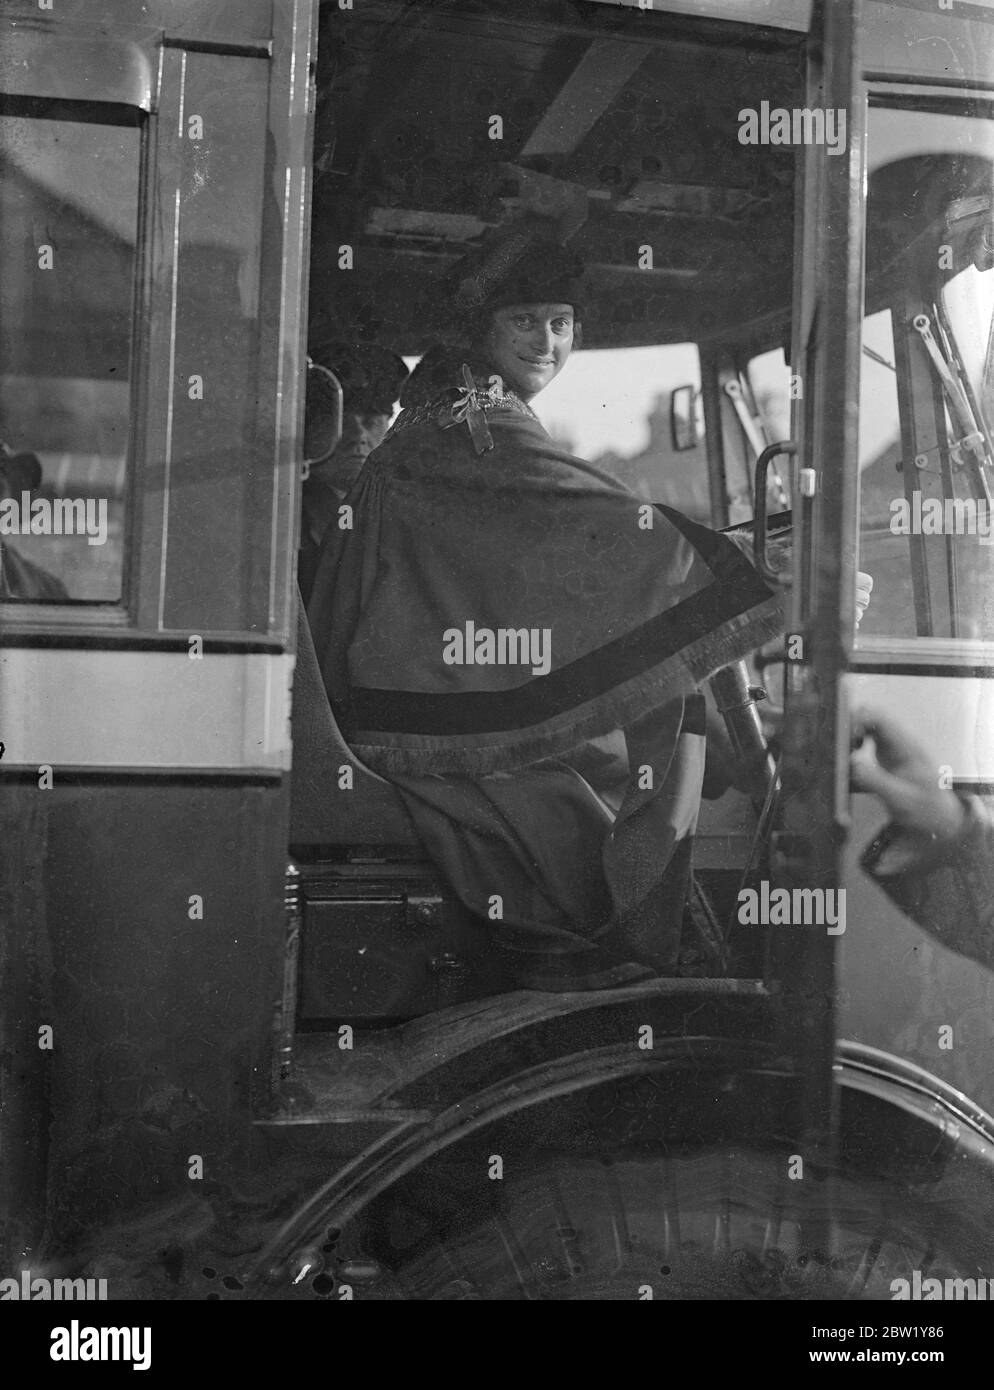 Woman Mayor of West Ham drives first trolleybus - biggest change-over begins Sunday morning. Mrs Daisy Parsons, Mayor of West Ham, drove a trolleybus out of the Greengate Street depot, West Ham, early Sunday morning to inaugurate London Transport's largest conversion from tramcars to trolleybuses. More than 15 road miles are affected. 78 trams will be withdrawn and 85 trolleybuses will replace them. They are said to be the quietest passenger vehicles yet devised. Photo shows: Mrs Daisy Parsons, Mayor of West Ham, in the driving seat of the first trolleybus. 6 June 1937 Stock Photo